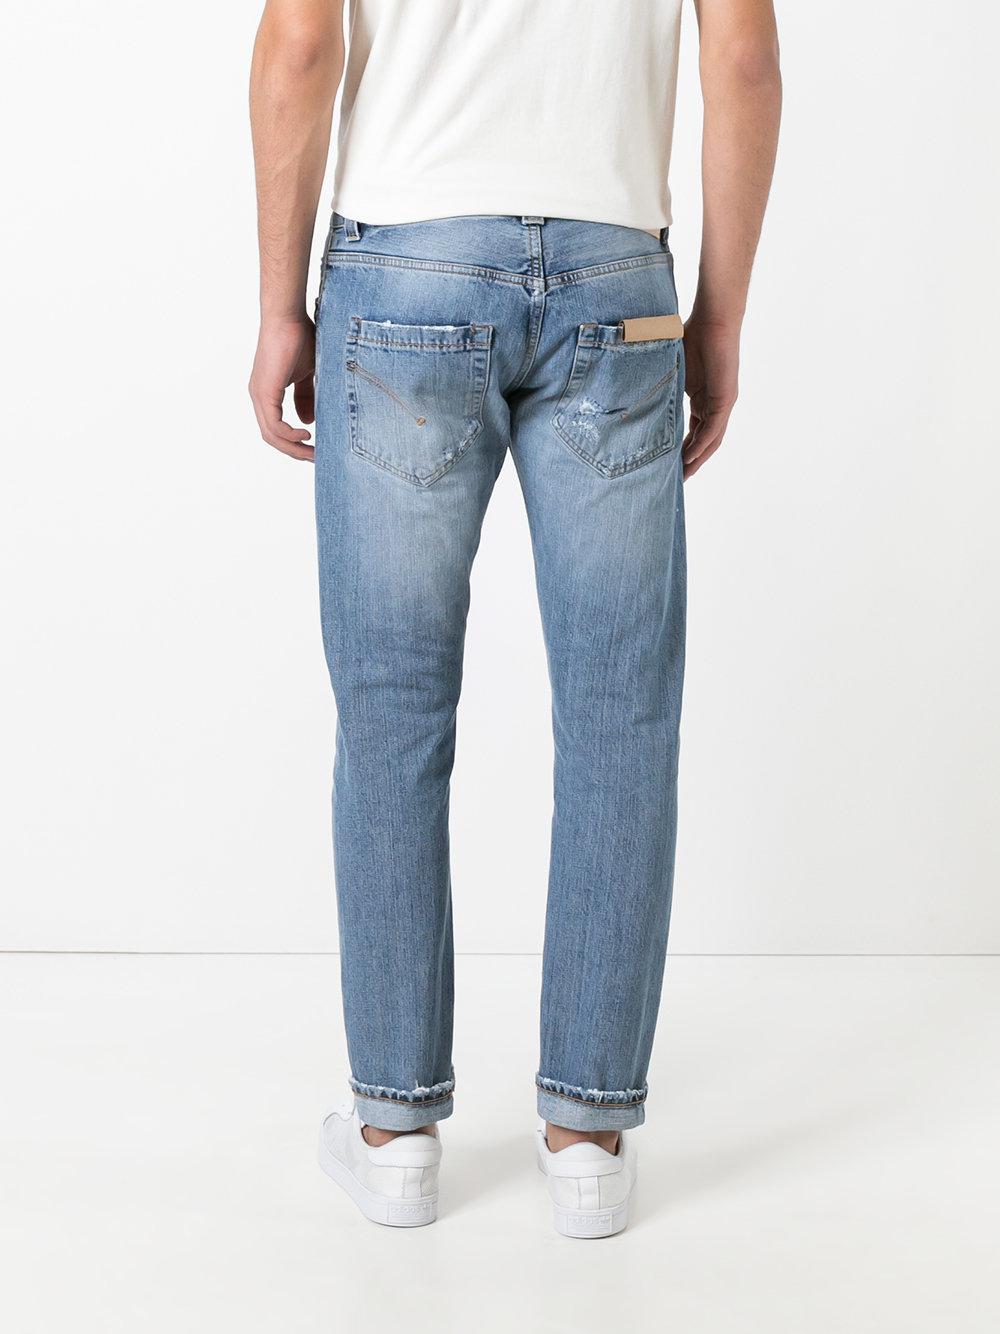 Lyst - Dondup Tapered Jeans in Blue for Men